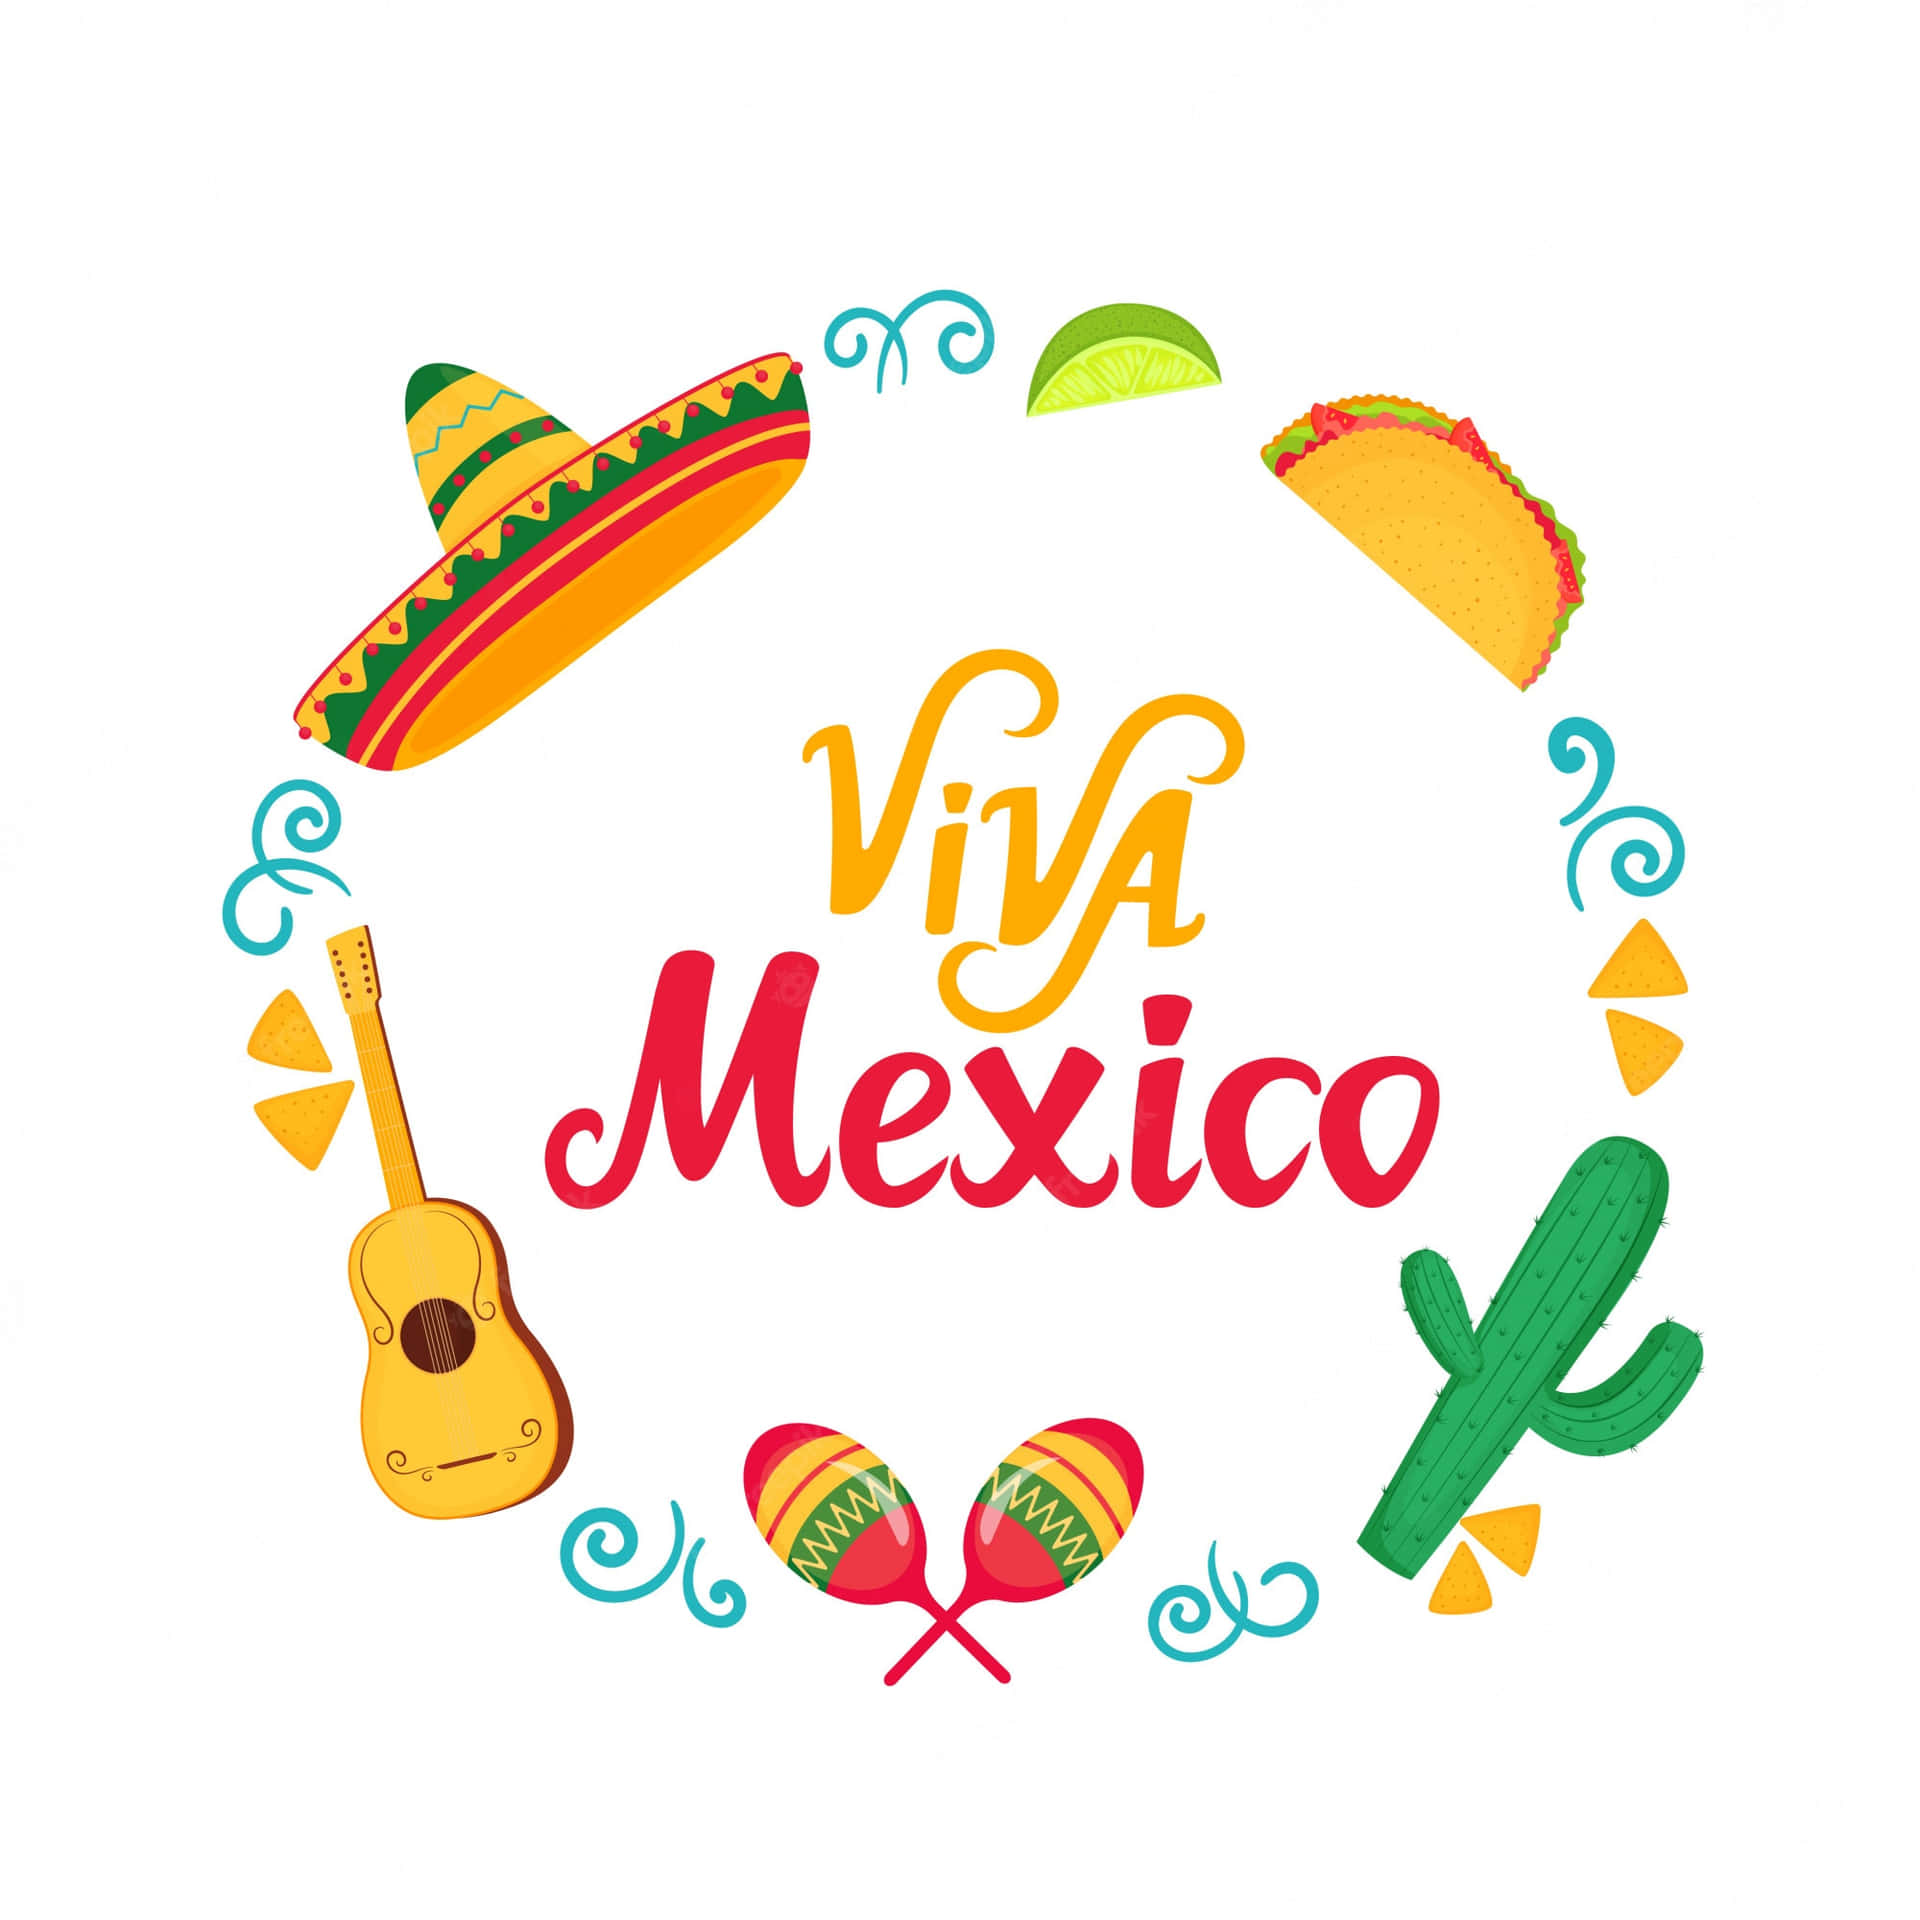 Viva Mexico - Celebrating the Culture and People of Mexico Wallpaper